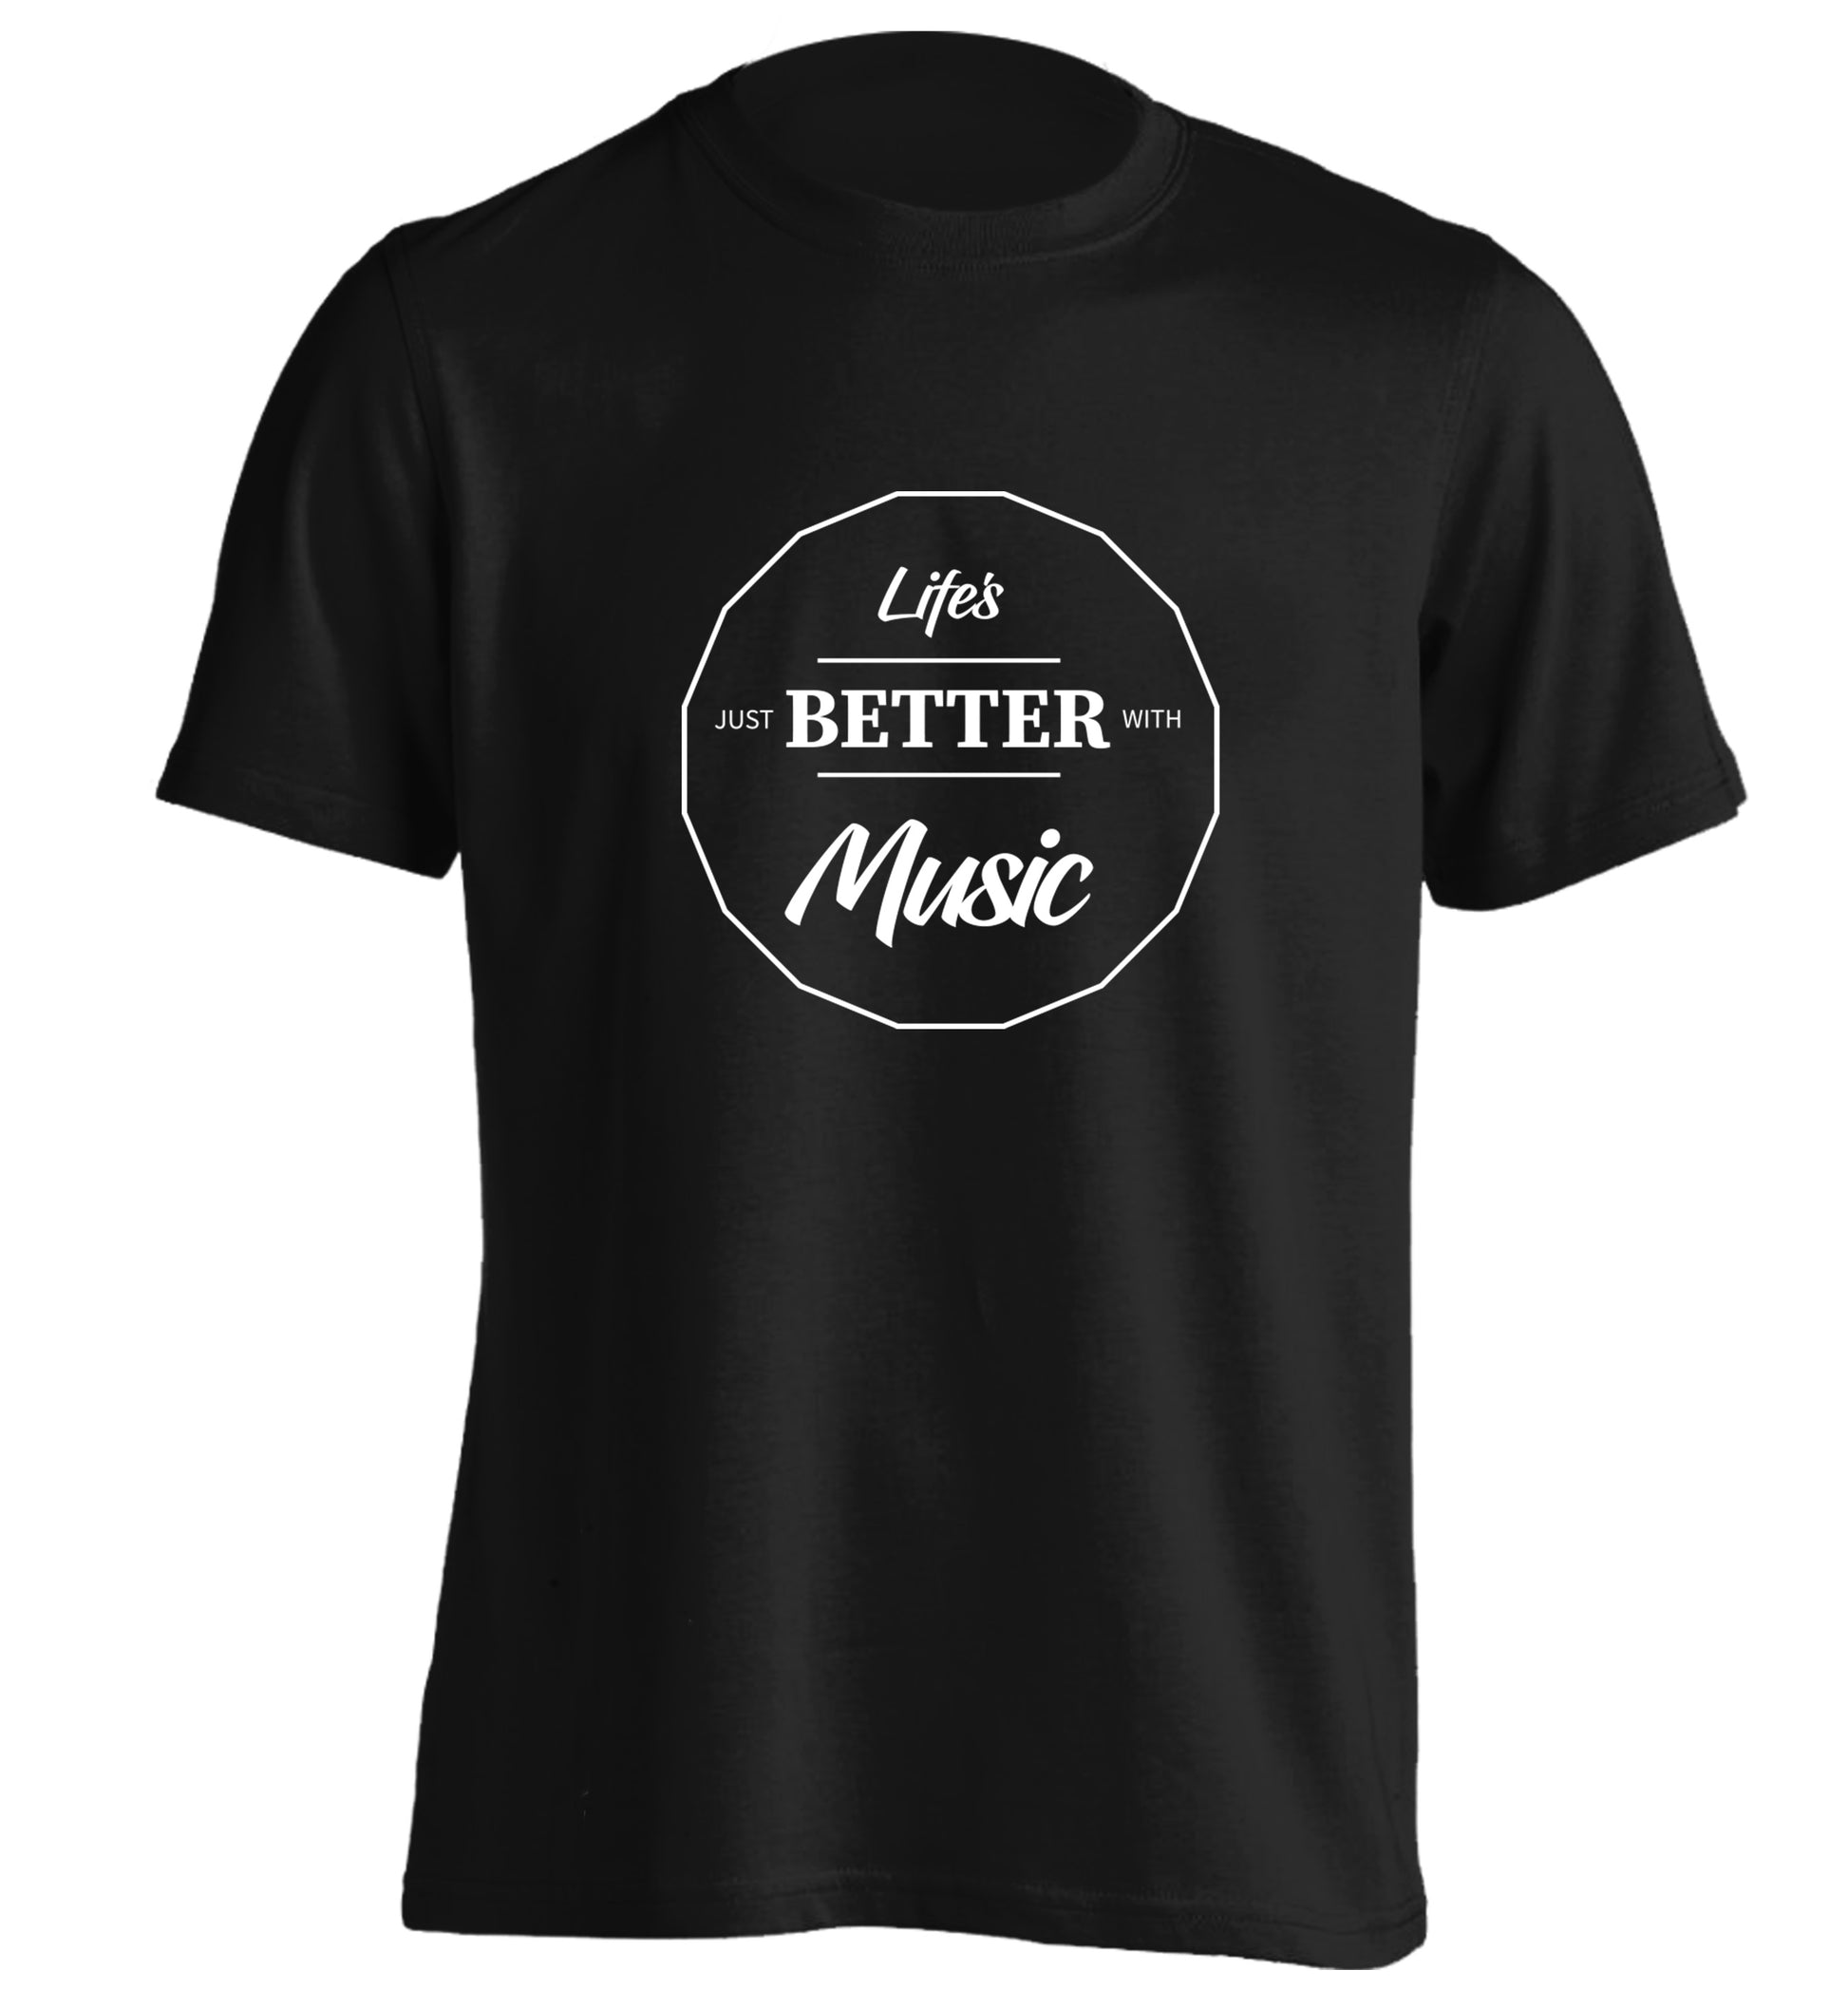 Life is Better With Music adults unisex black Tshirt 2XL